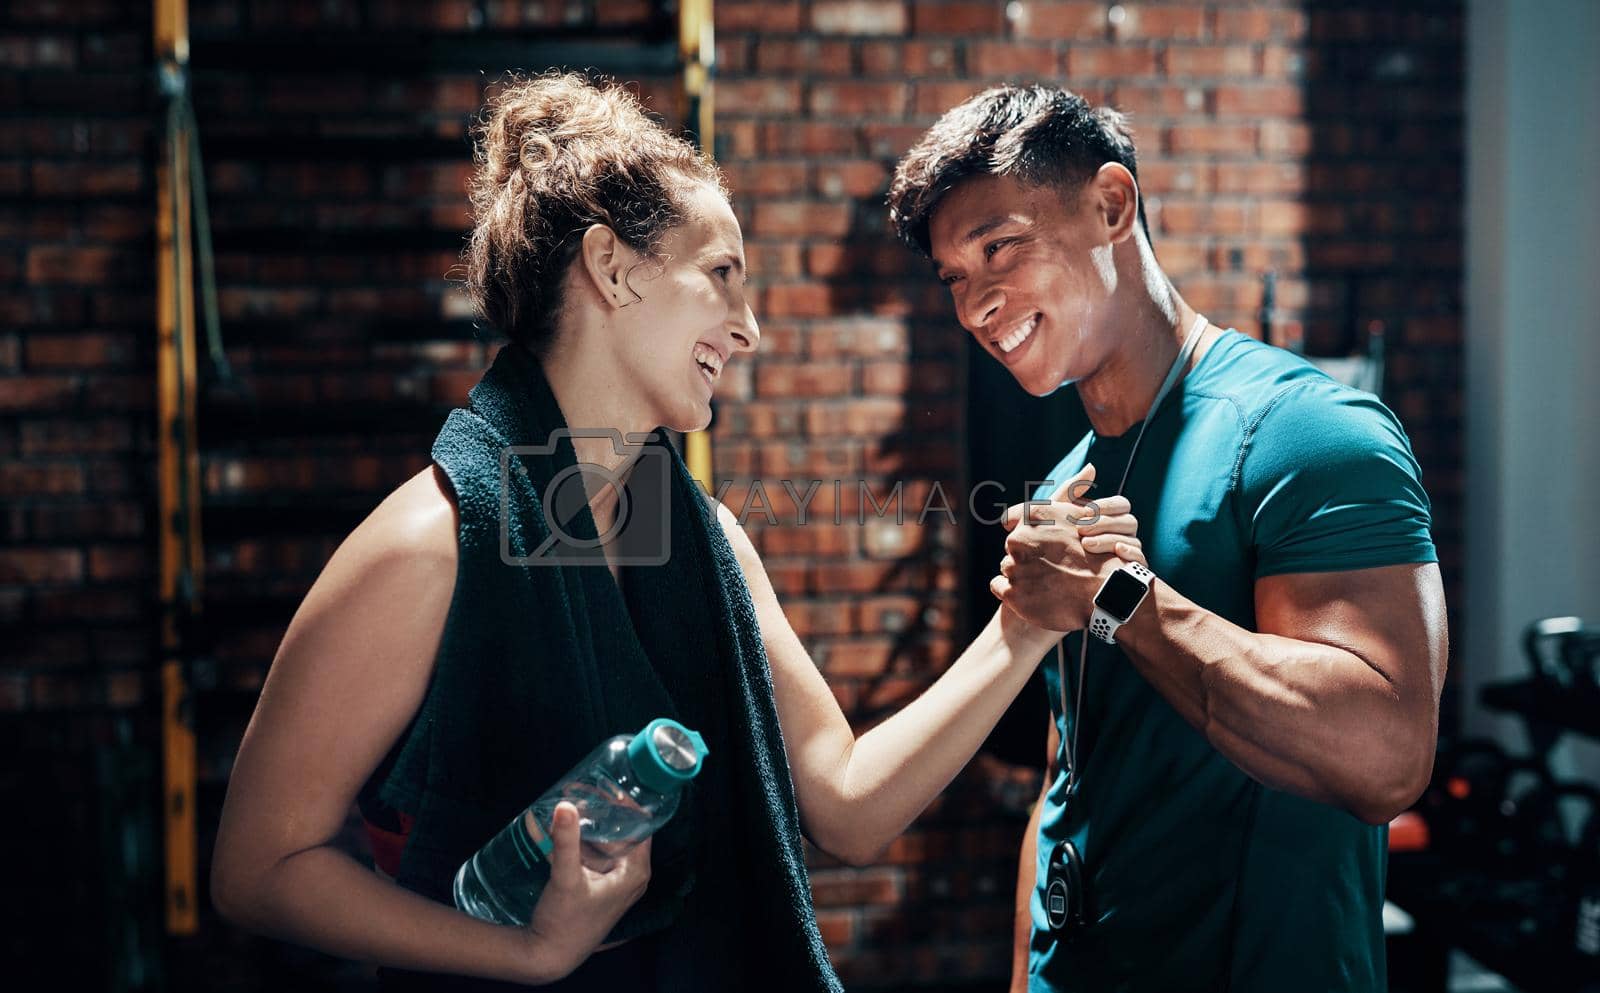 Royalty free image of Cant wait till our next session. Cropped shot of two cheerful young sportspeople cheering while working out in a gym. by YuriArcurs